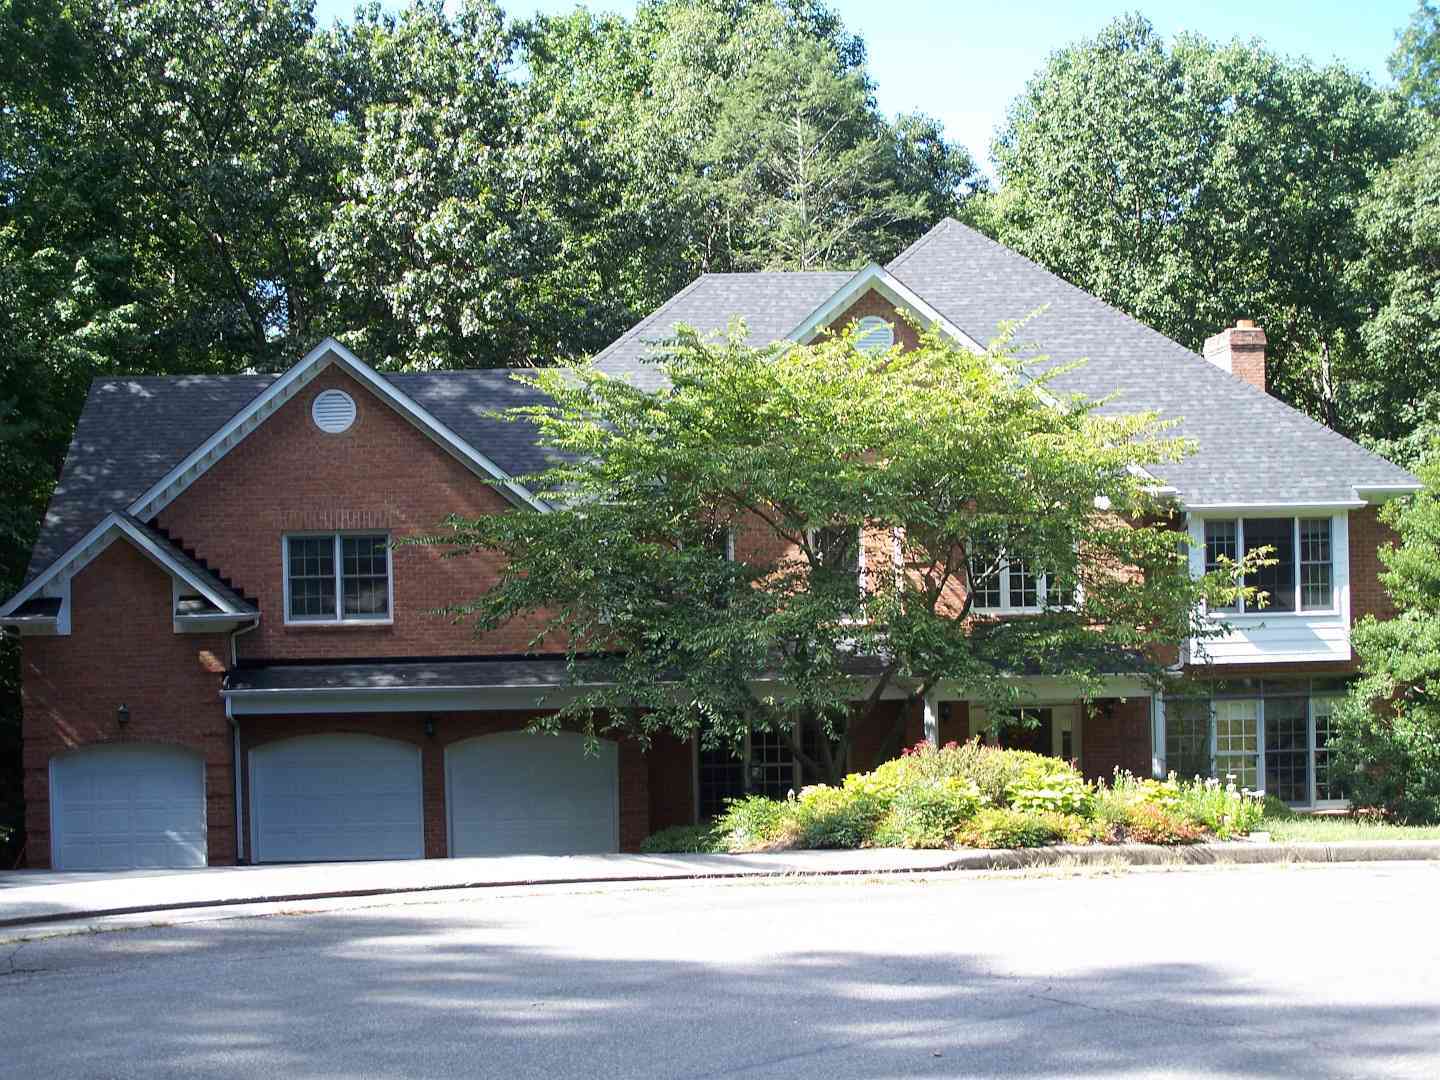 A single family home with a three car garage and gray roof